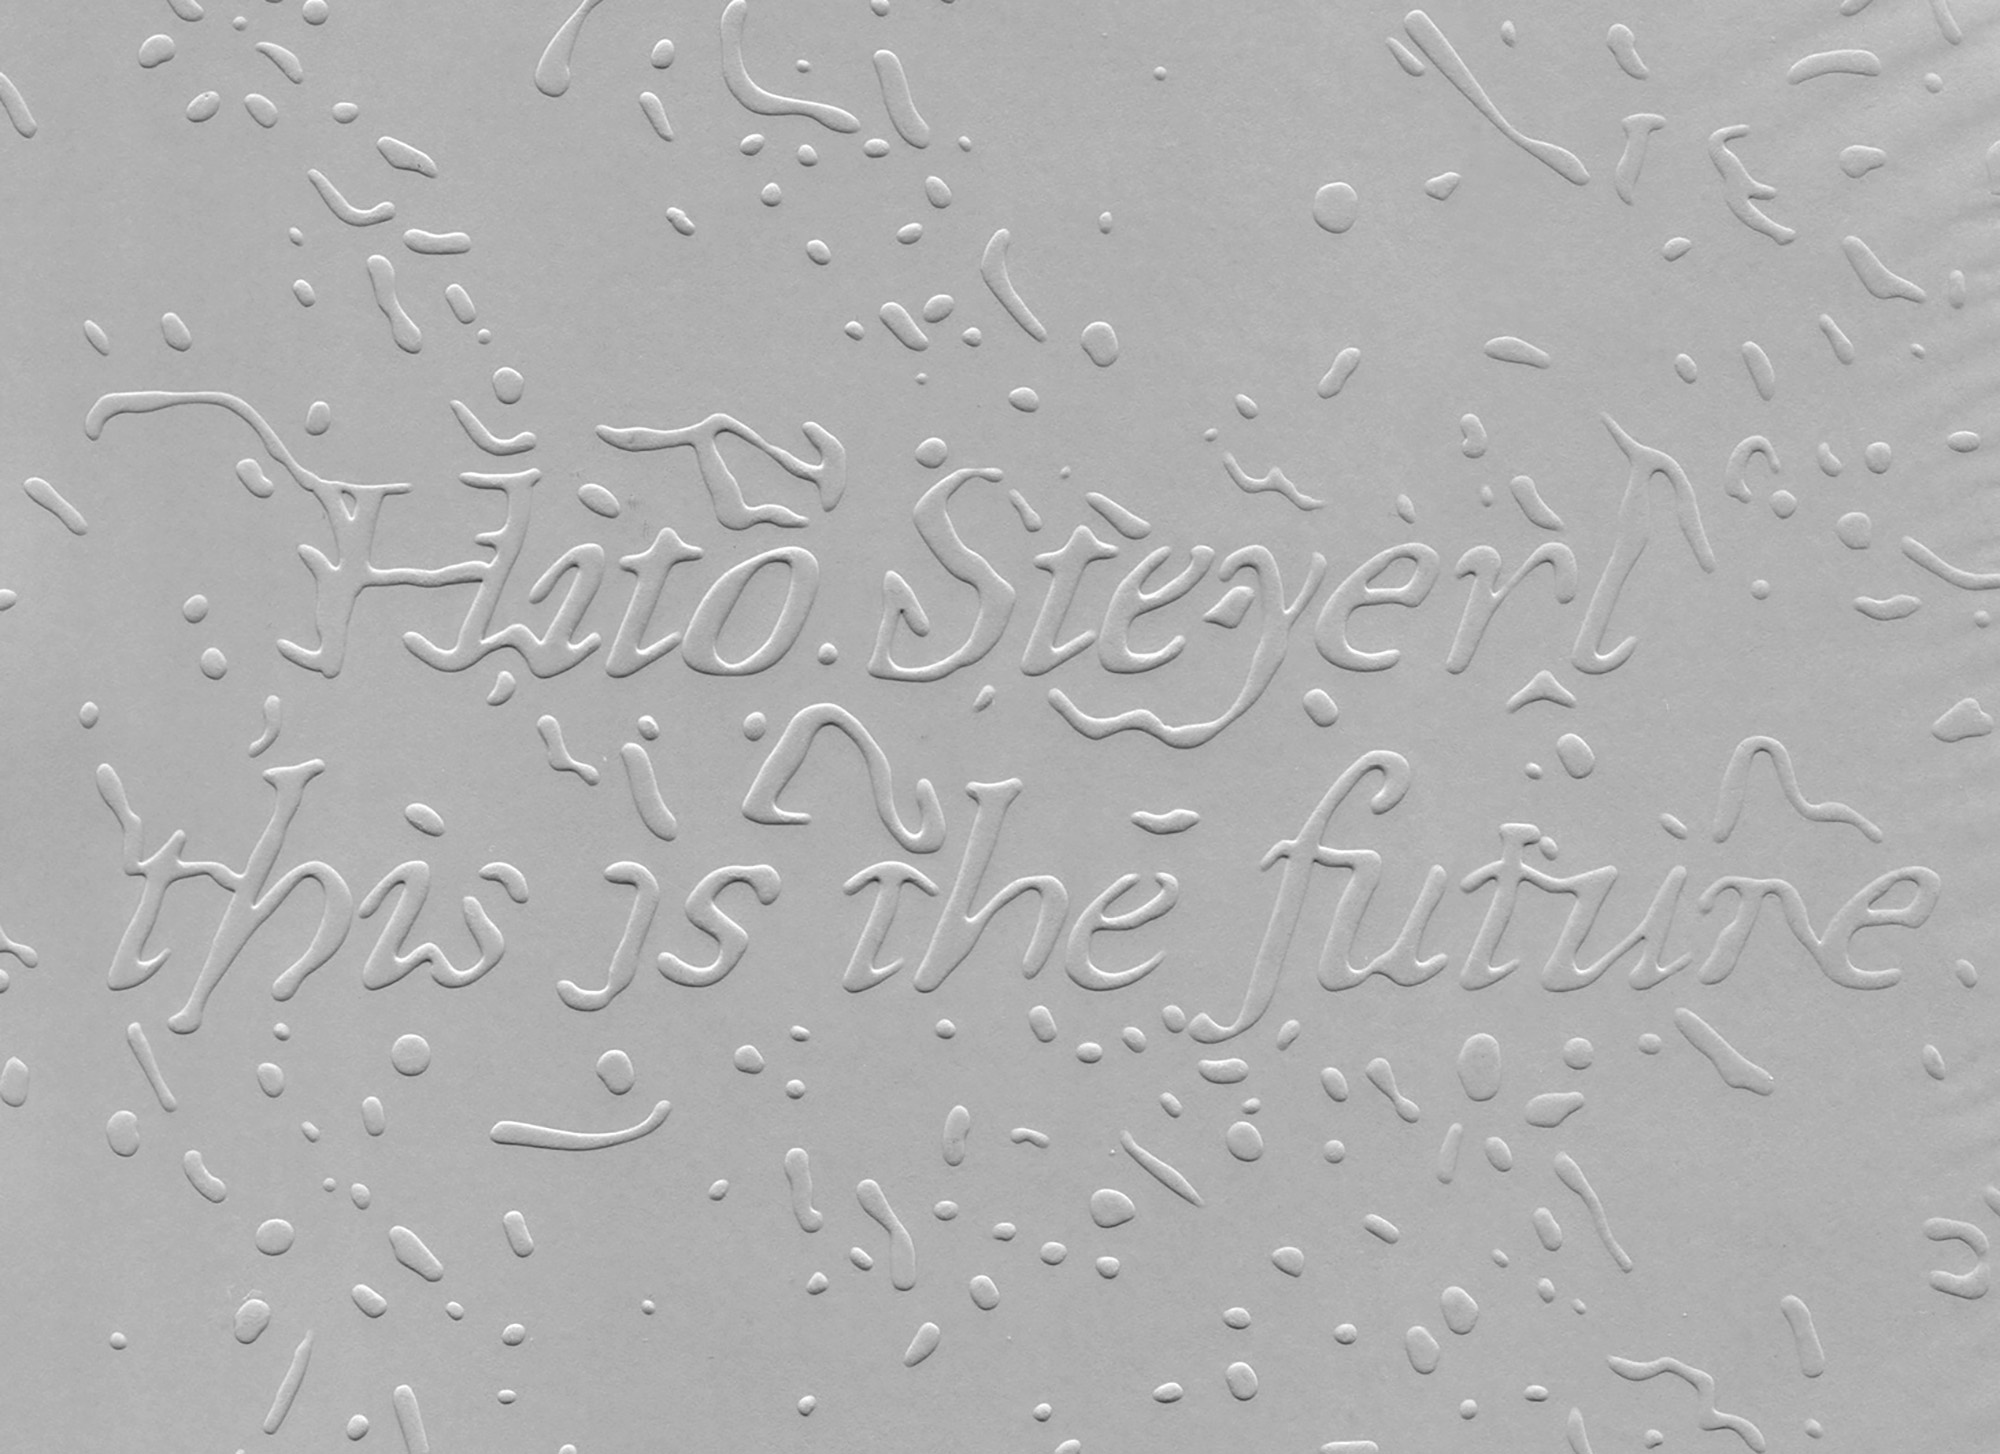 A close-up of a gray book cover. The letters are centered and embossed, surrounded by particles in different sizes.